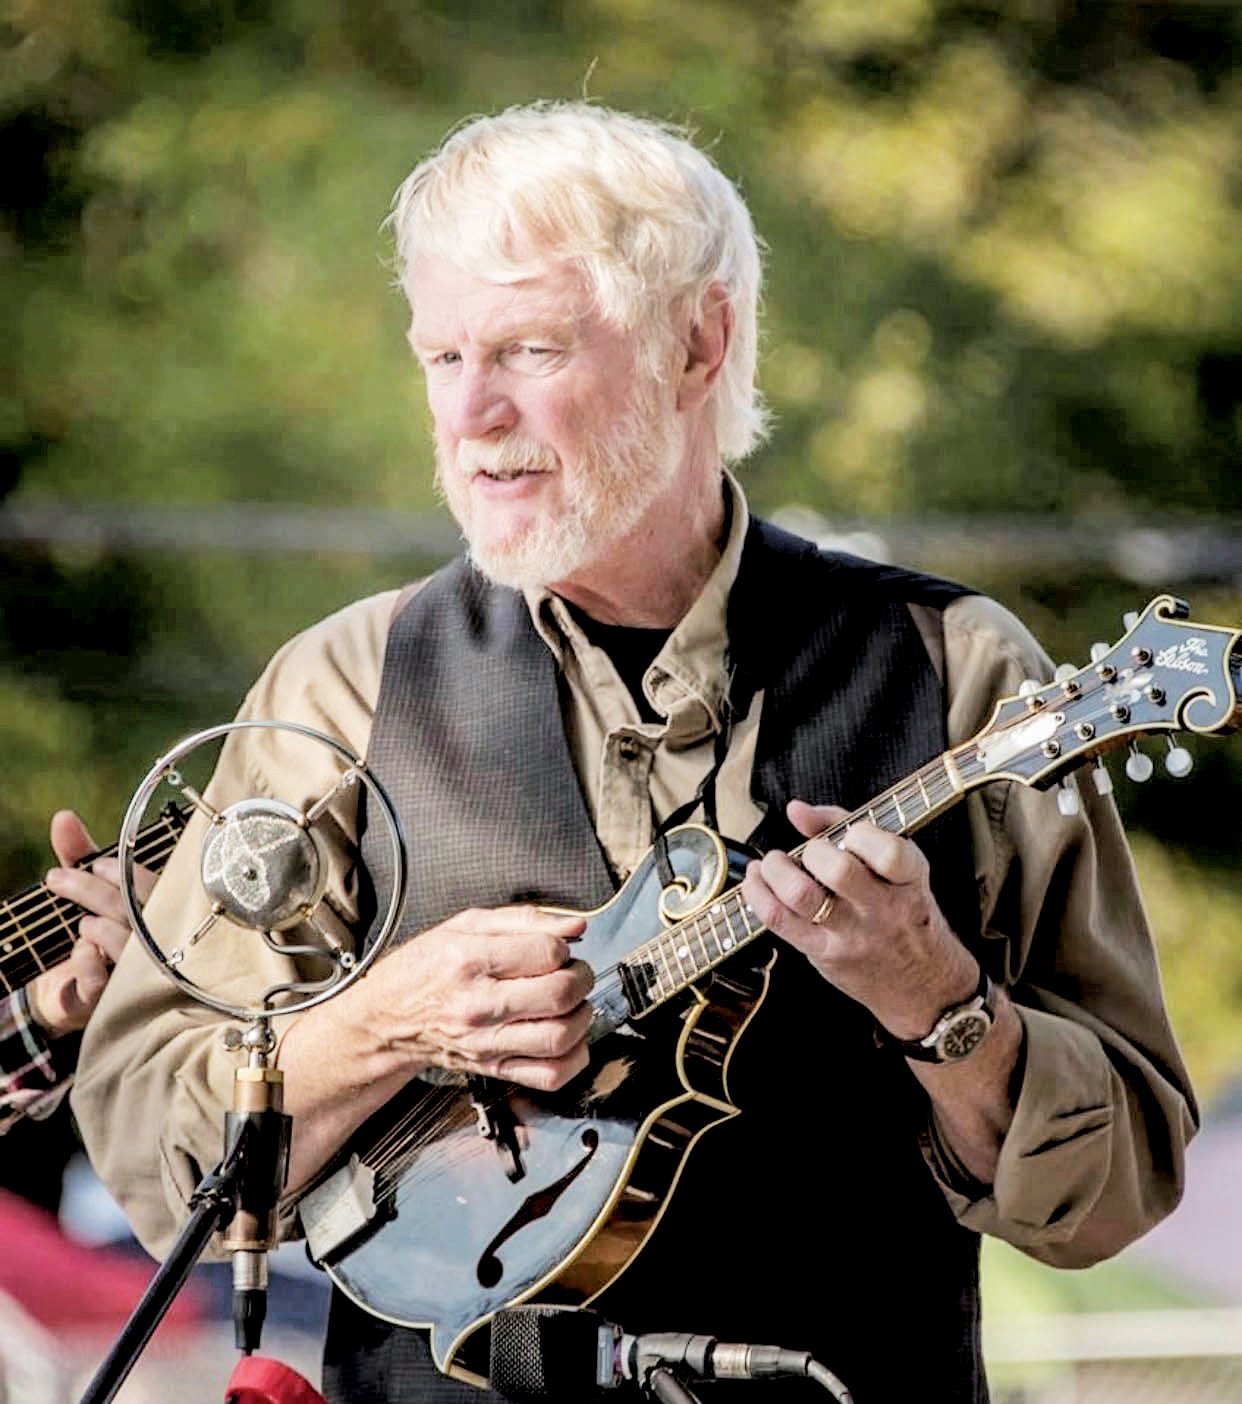 Tommy Edwards, a native of Siler City, was one of the state's best-known bluegrass musicians and teachers. He co-founded The Bluegrass Experience and performed professionally for half a century.